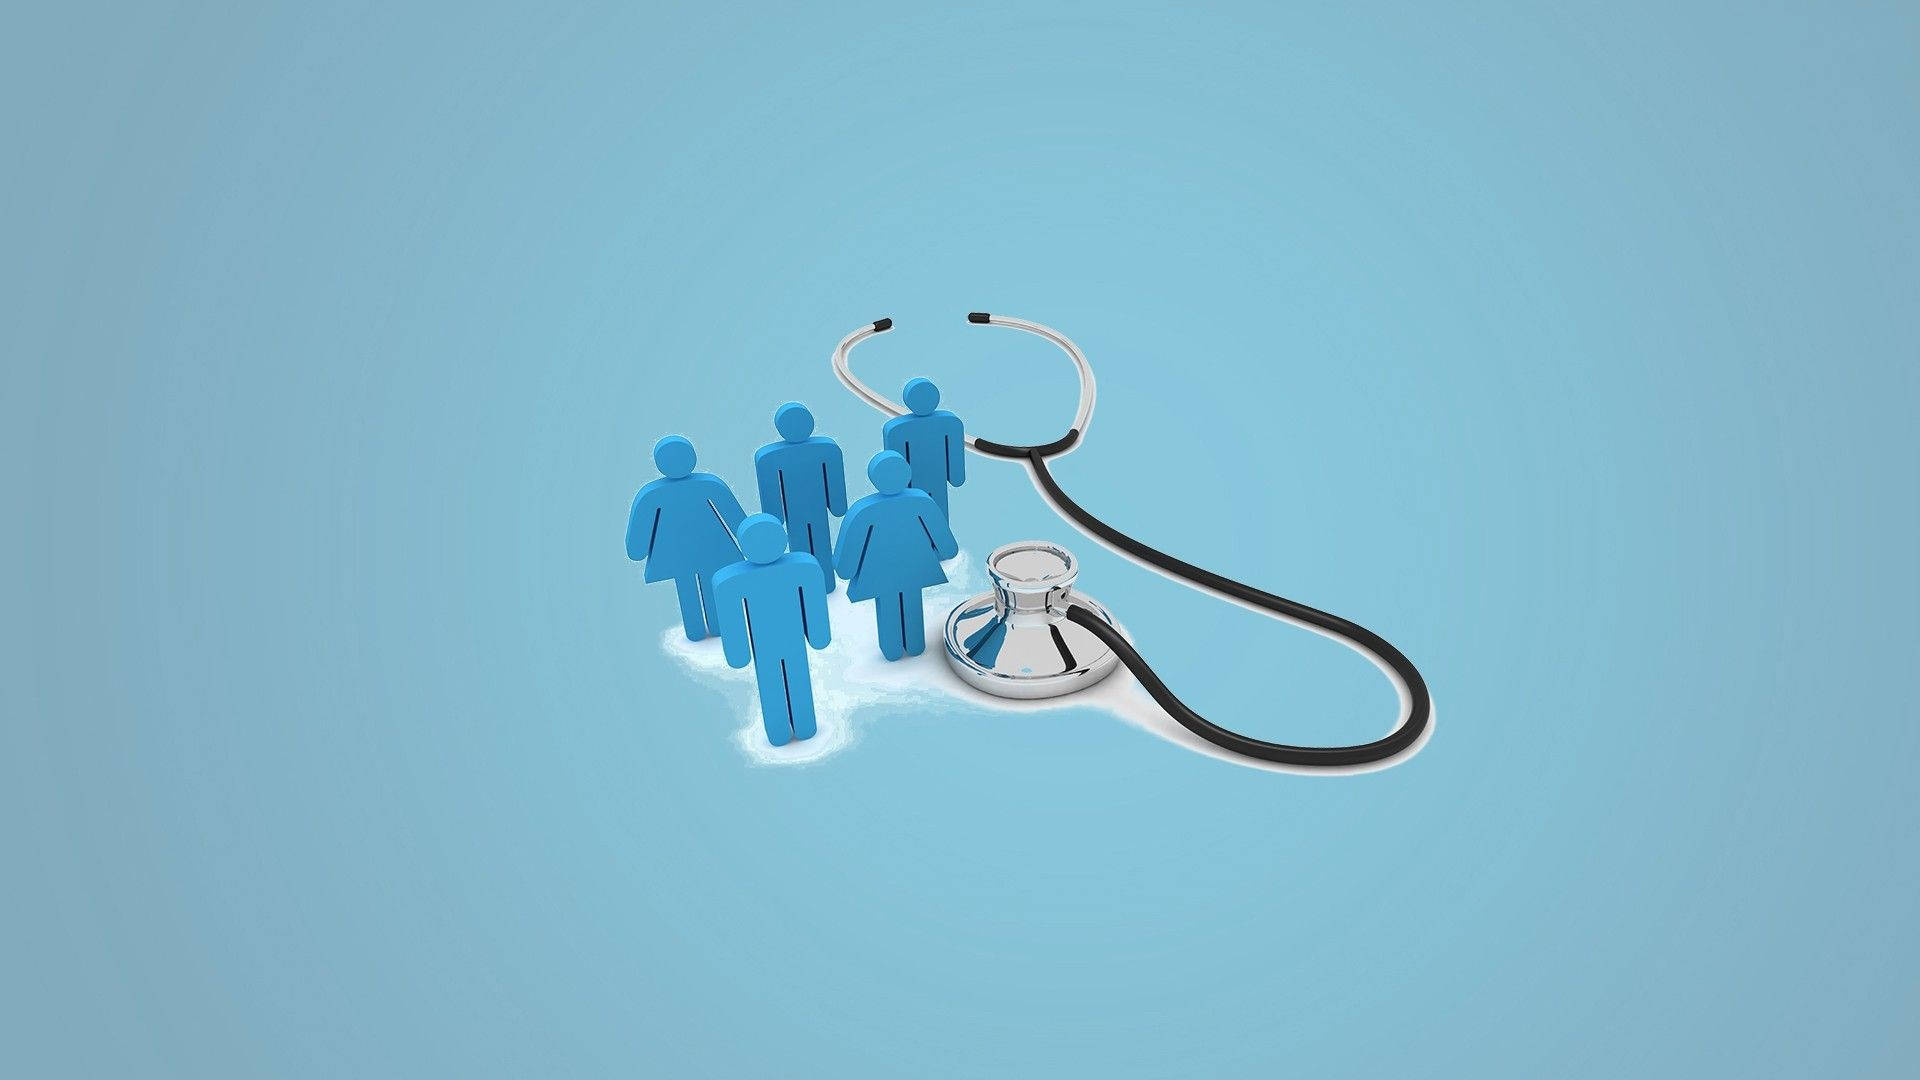 Healthcare professional using a stethoscope Wallpaper